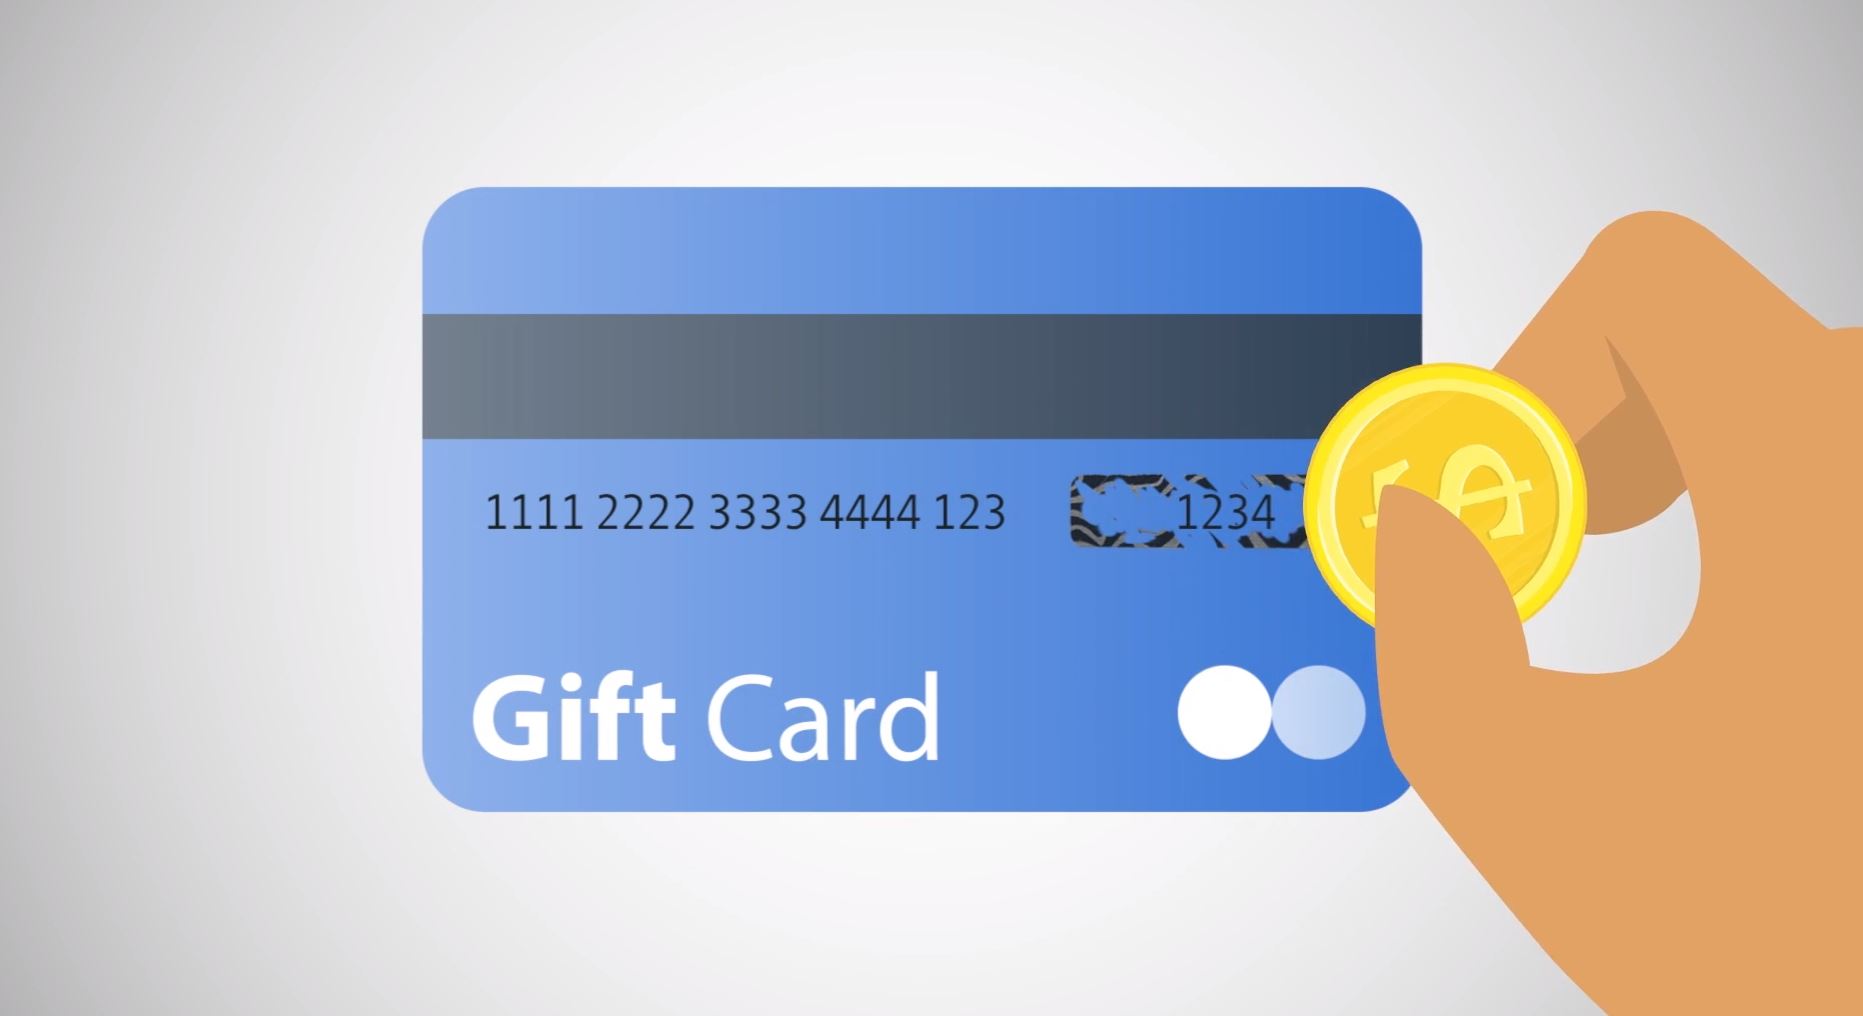 Trussville PD warns about gift card scam after resident becomes victim